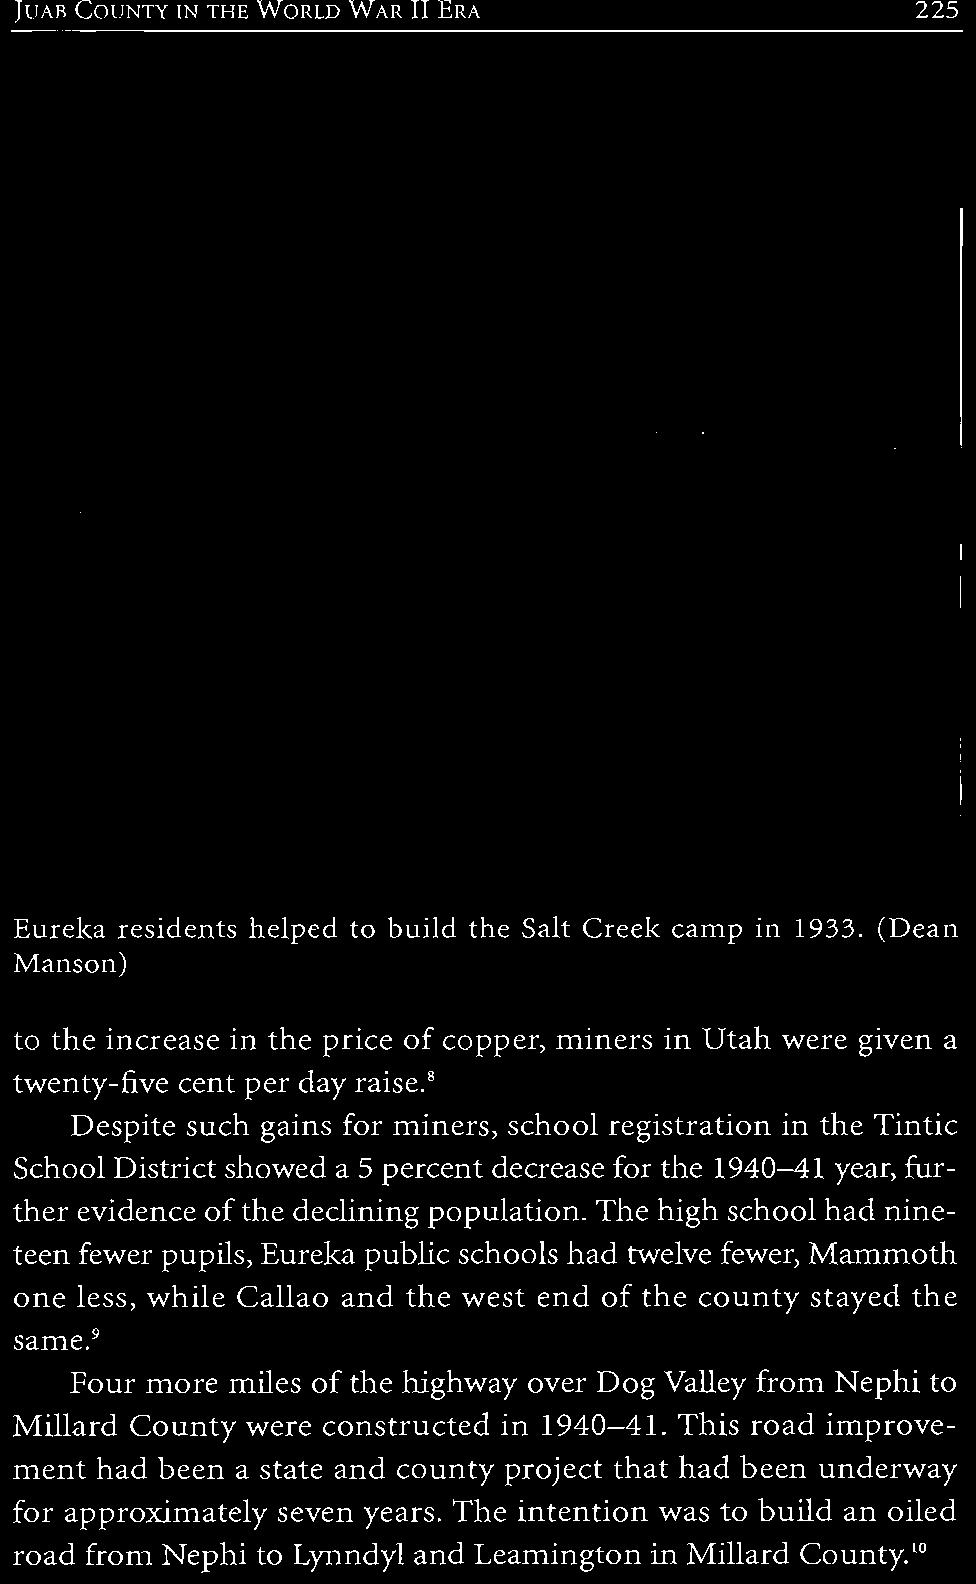 8 Despite such gains for miners, school registration in the Tintic School District showed a 5 percent decrease for the 1940 41 year, further evidence of the declining population.